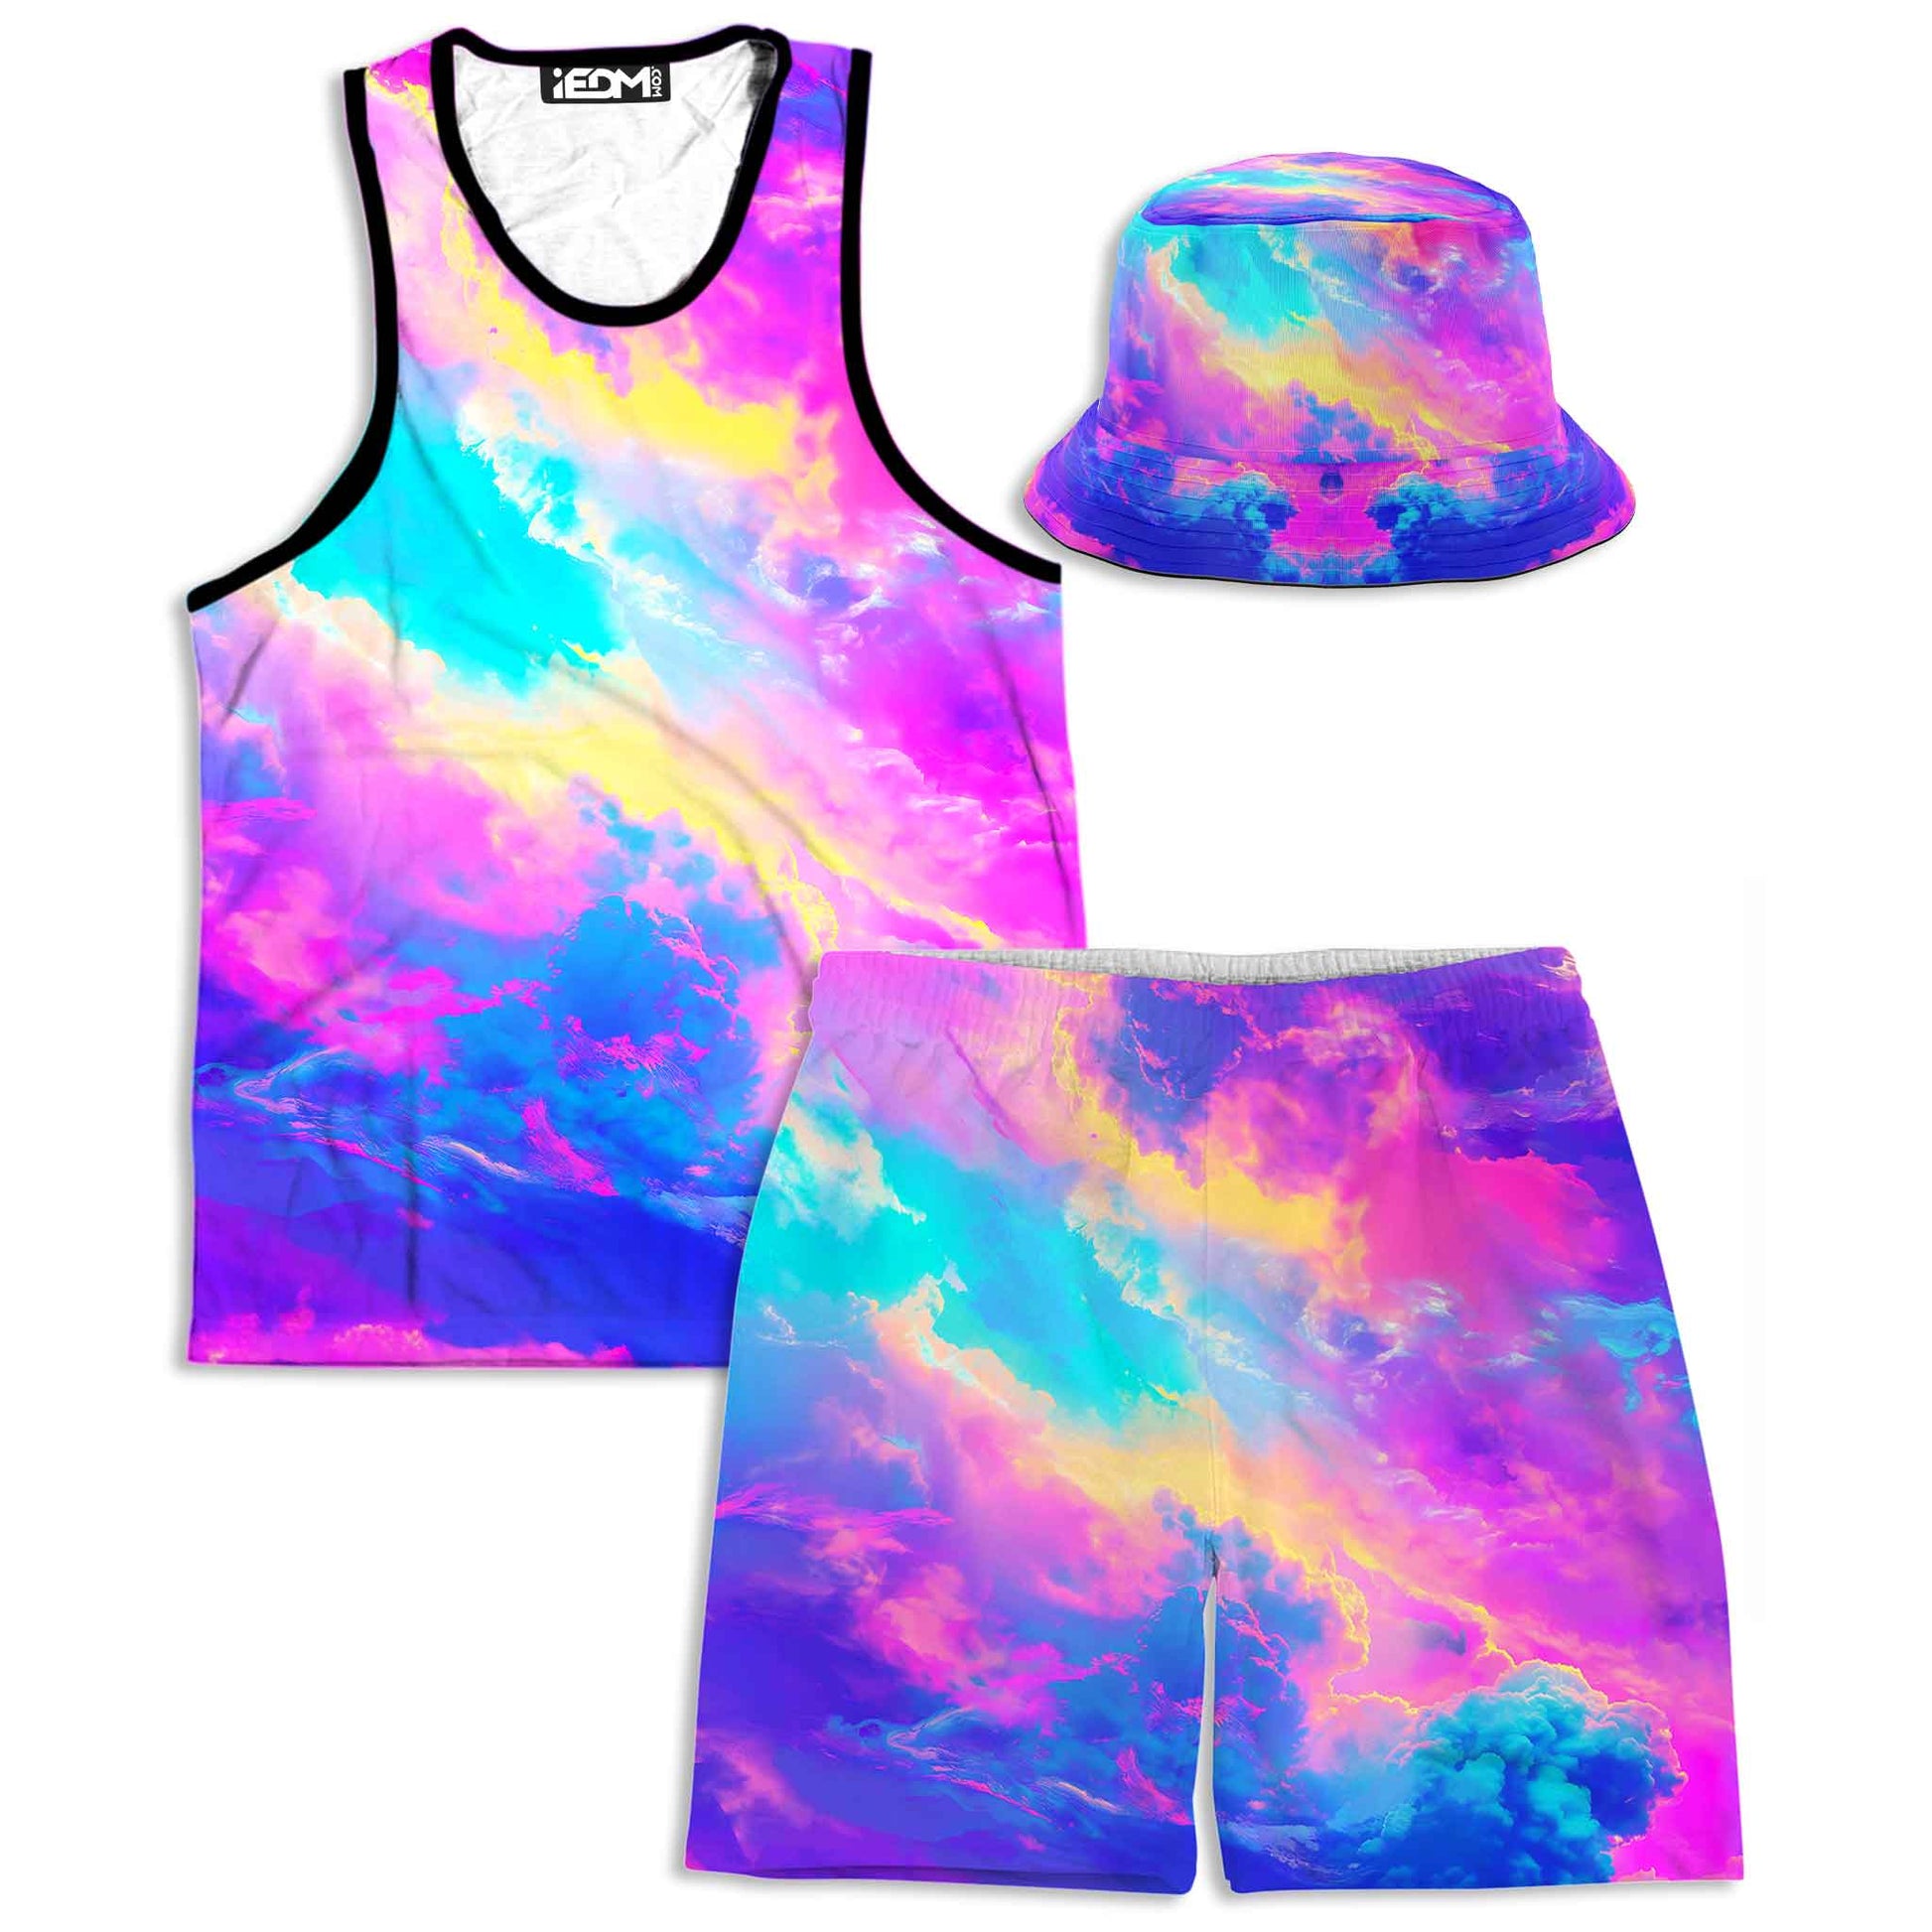 Claudopia Tank and Shorts with Bucket Hat Combo, iEDM, | iEDM